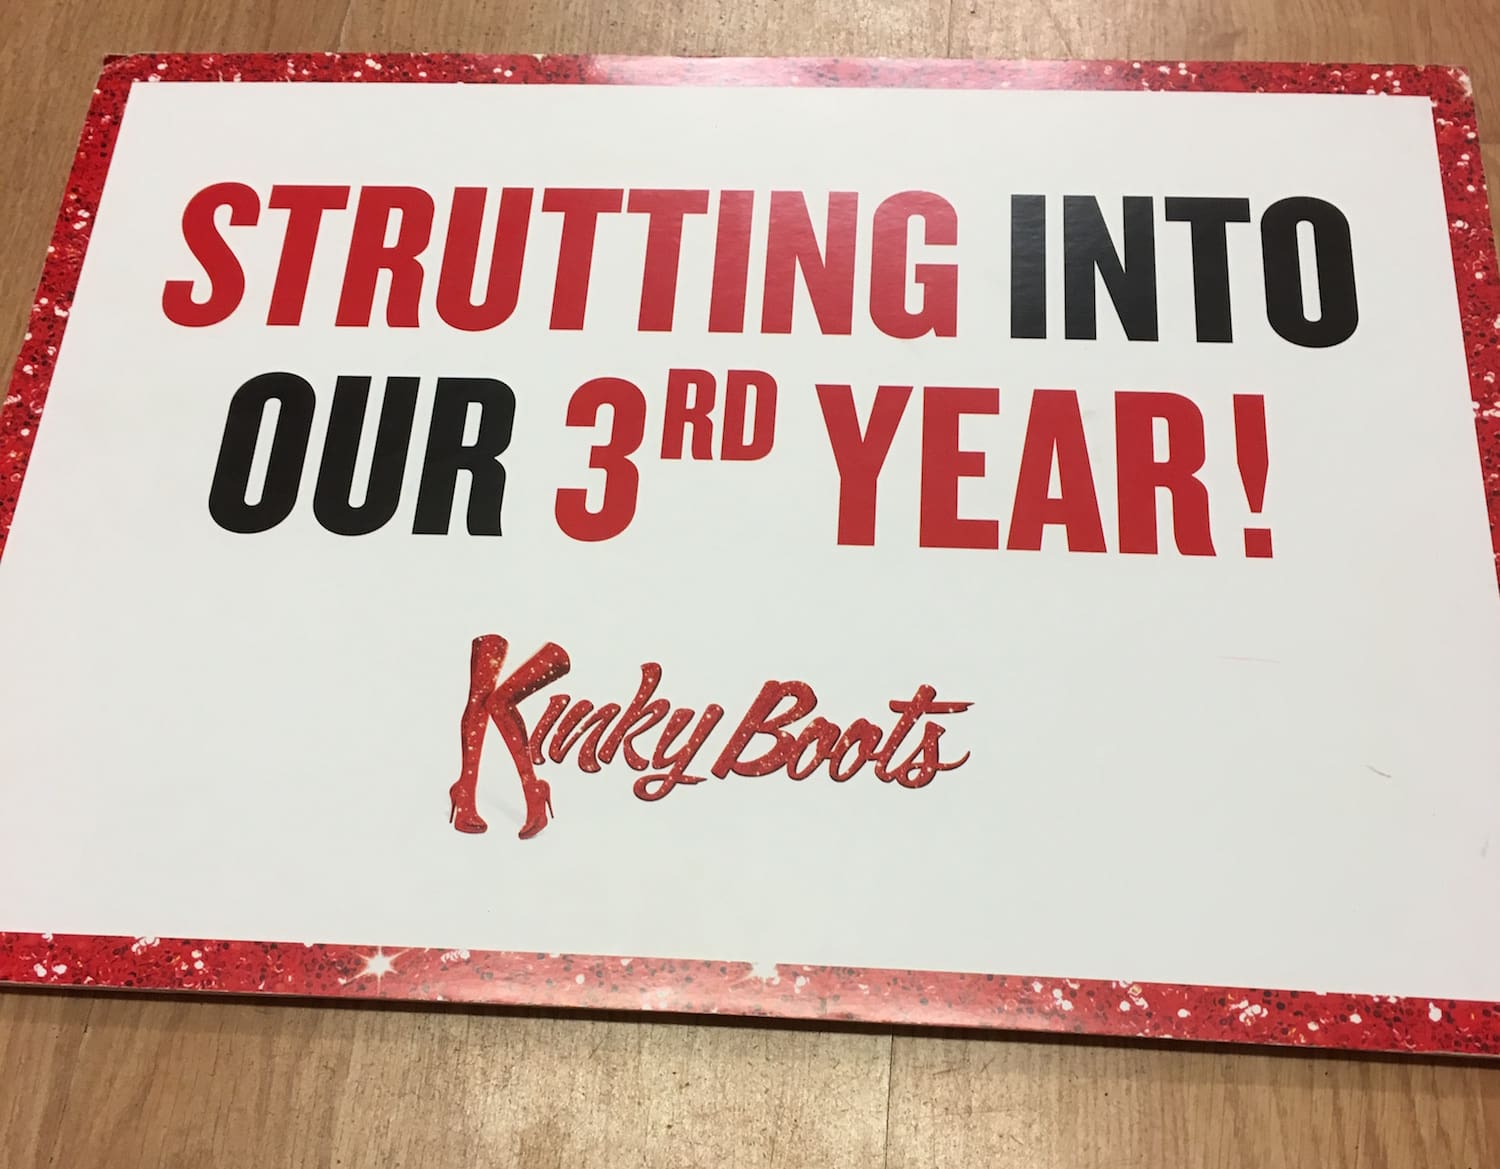 Featured image for “Enter out competition for a chance to win a Kinky Boots advertising board”